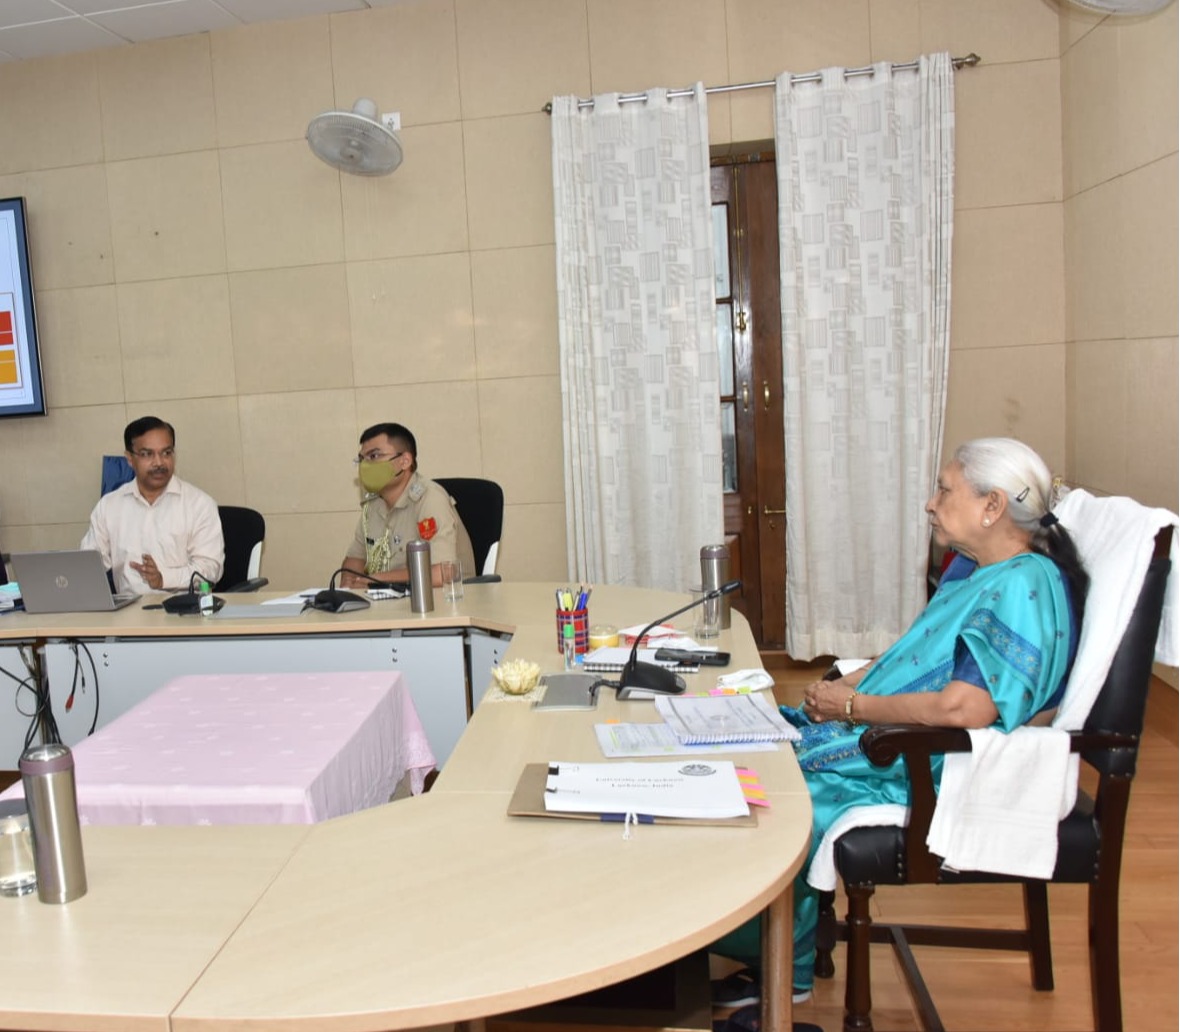 Presentation held before the Governor for NAAC Evaluation of Lucknow University and Madan Mohan Malaviya University of Technology, Gorakhpur